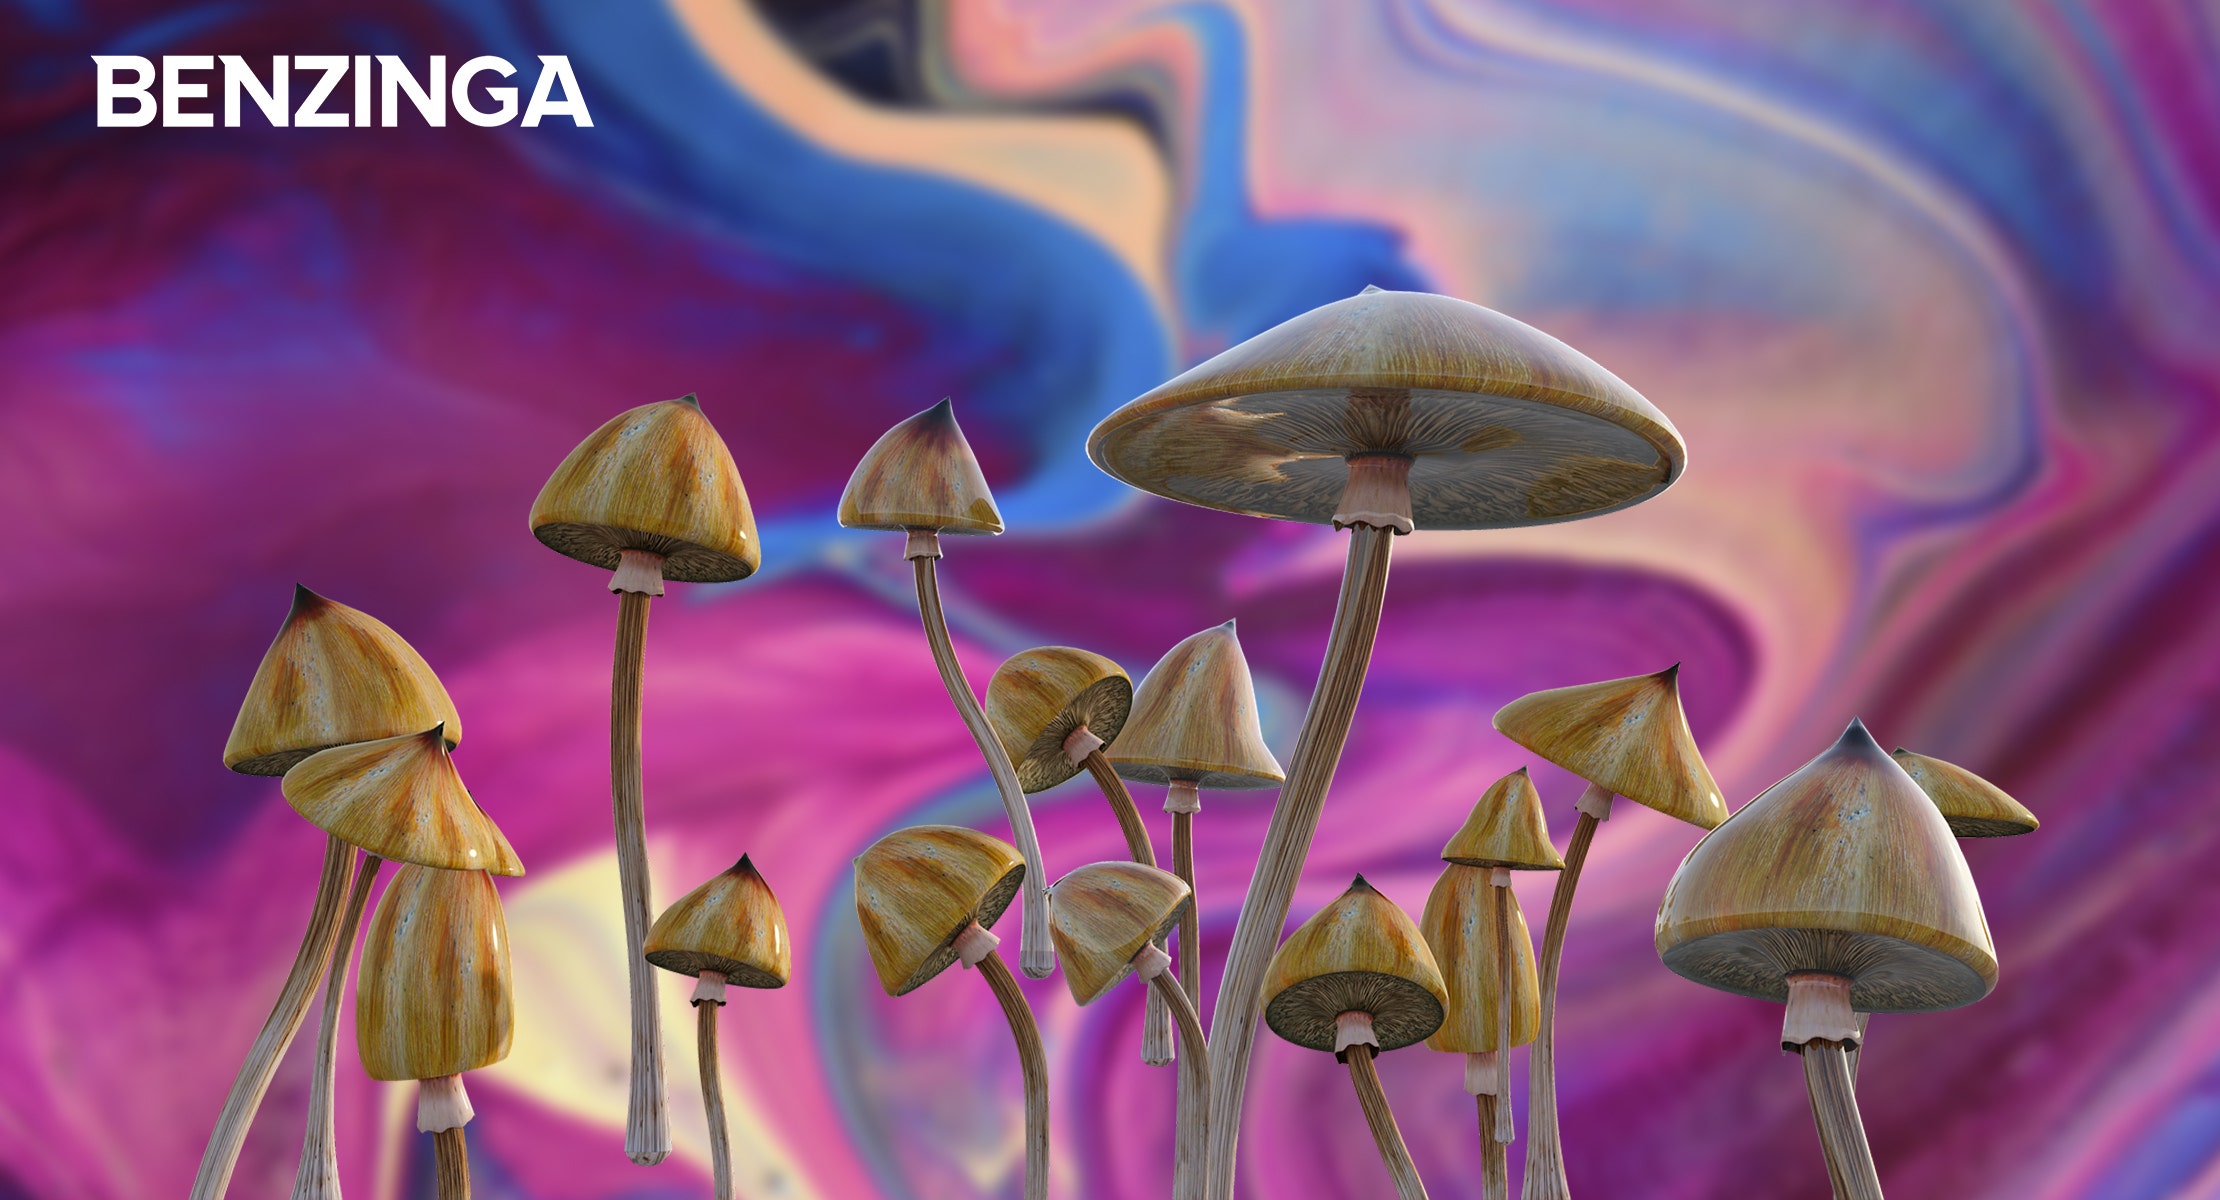 EXCLUSIVE: How Psilocybin Services Providers Are Facing Oregon's County 'Opt-Out' Vote In November Ballot, Synthesis' Exposition In Jackson County